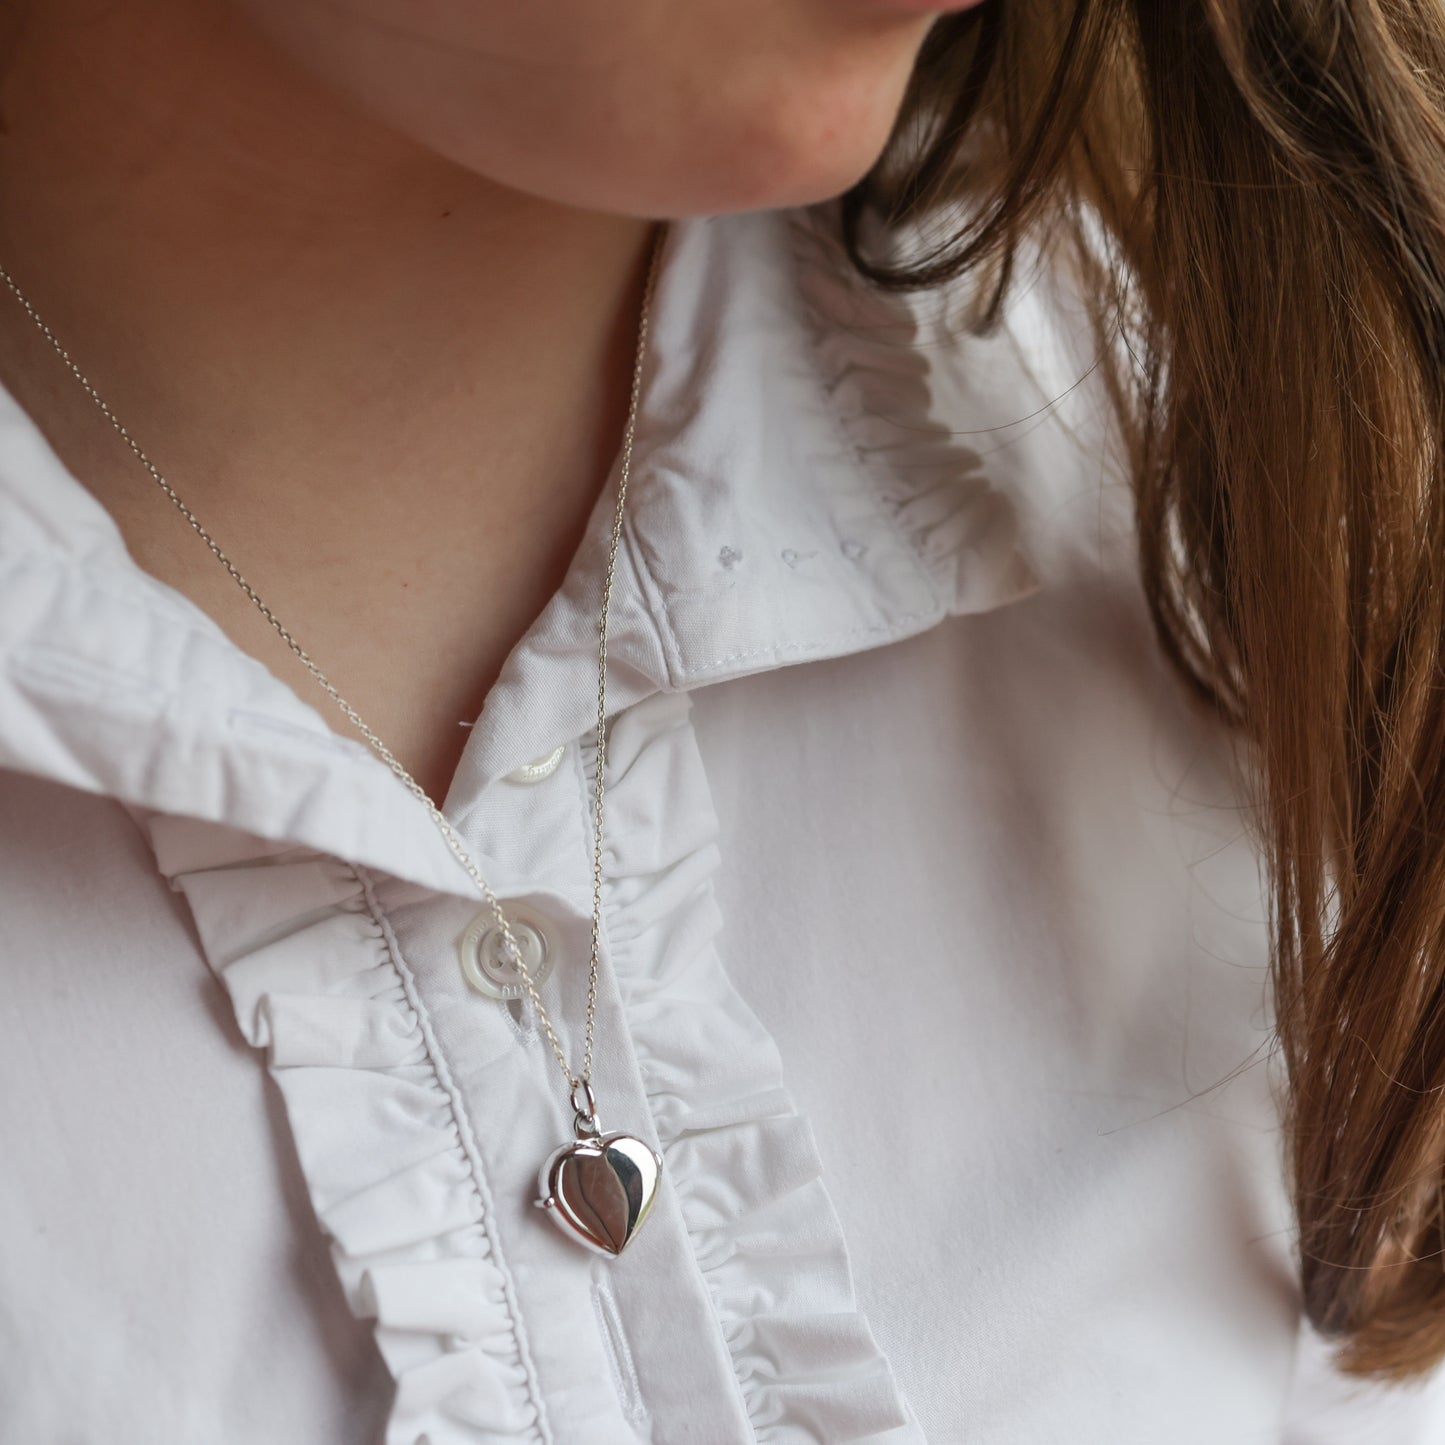 model wearing white shirt and silver heart shaped photo necklace